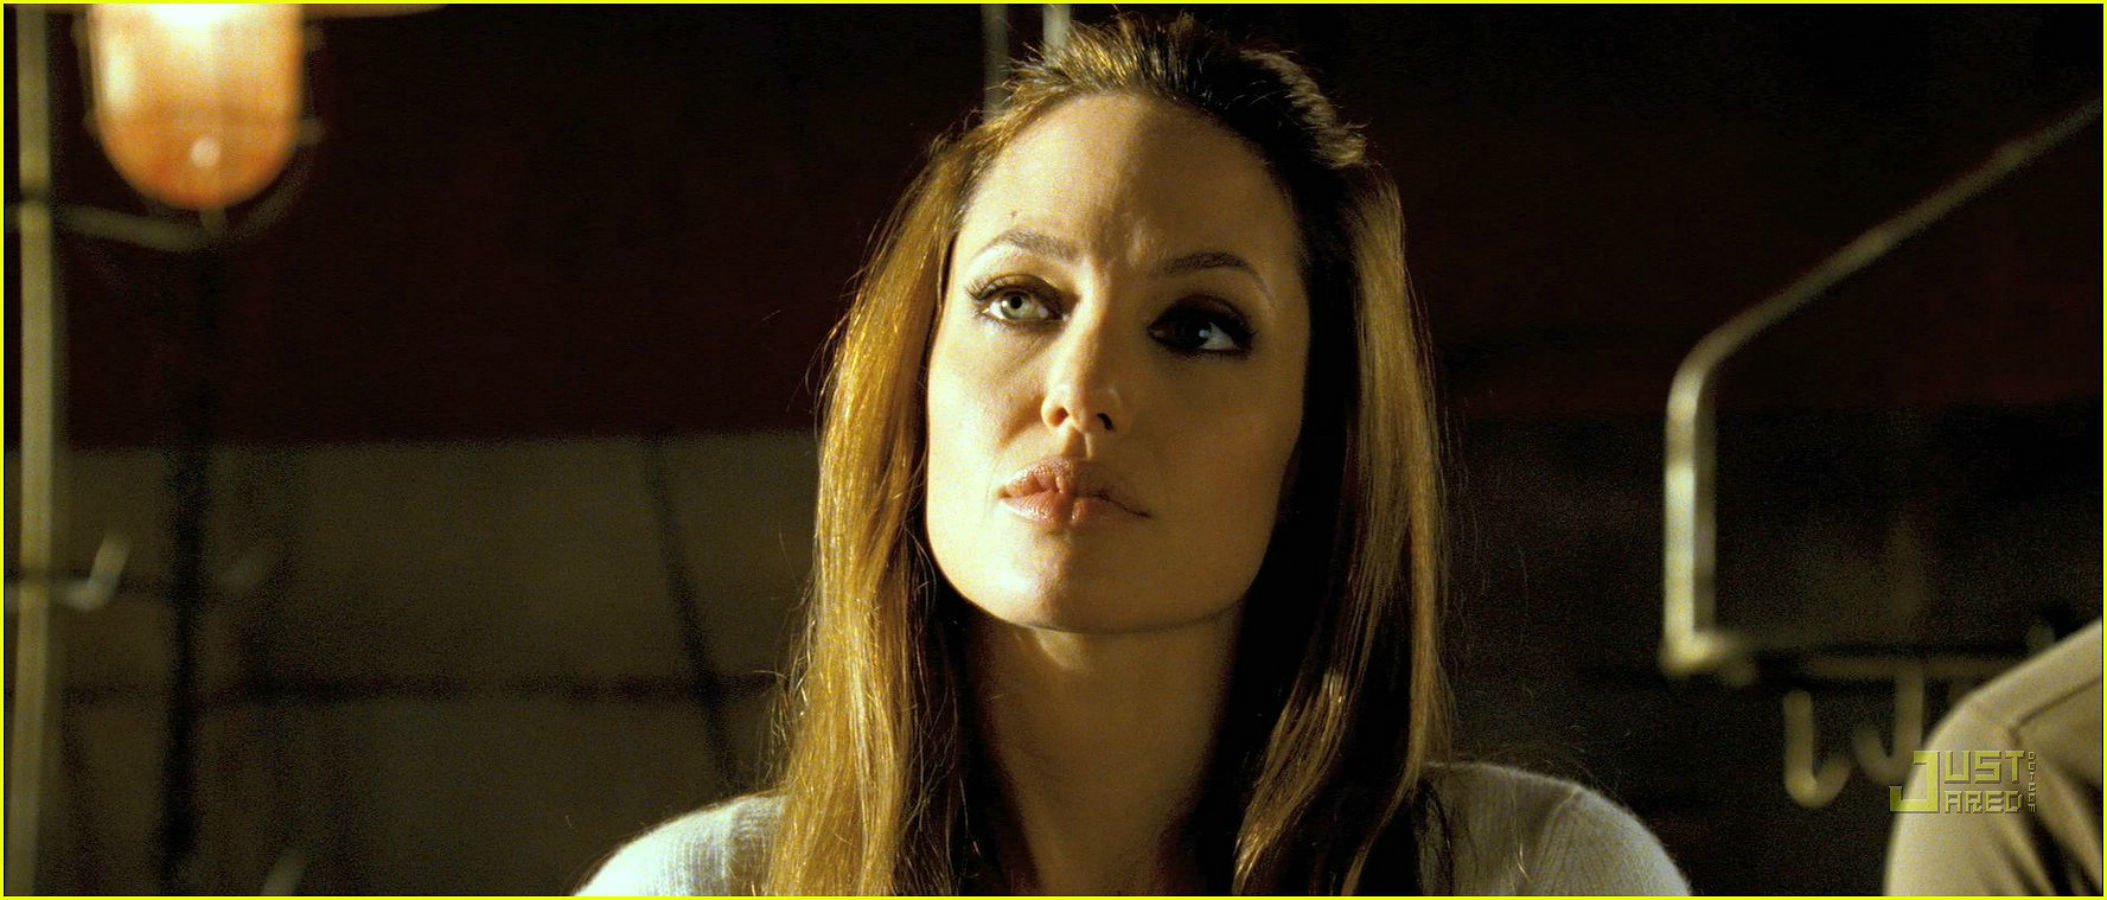 wanted, Action, Crime, Fantasy, Sci fi, Jolie,  17 Wallpaper